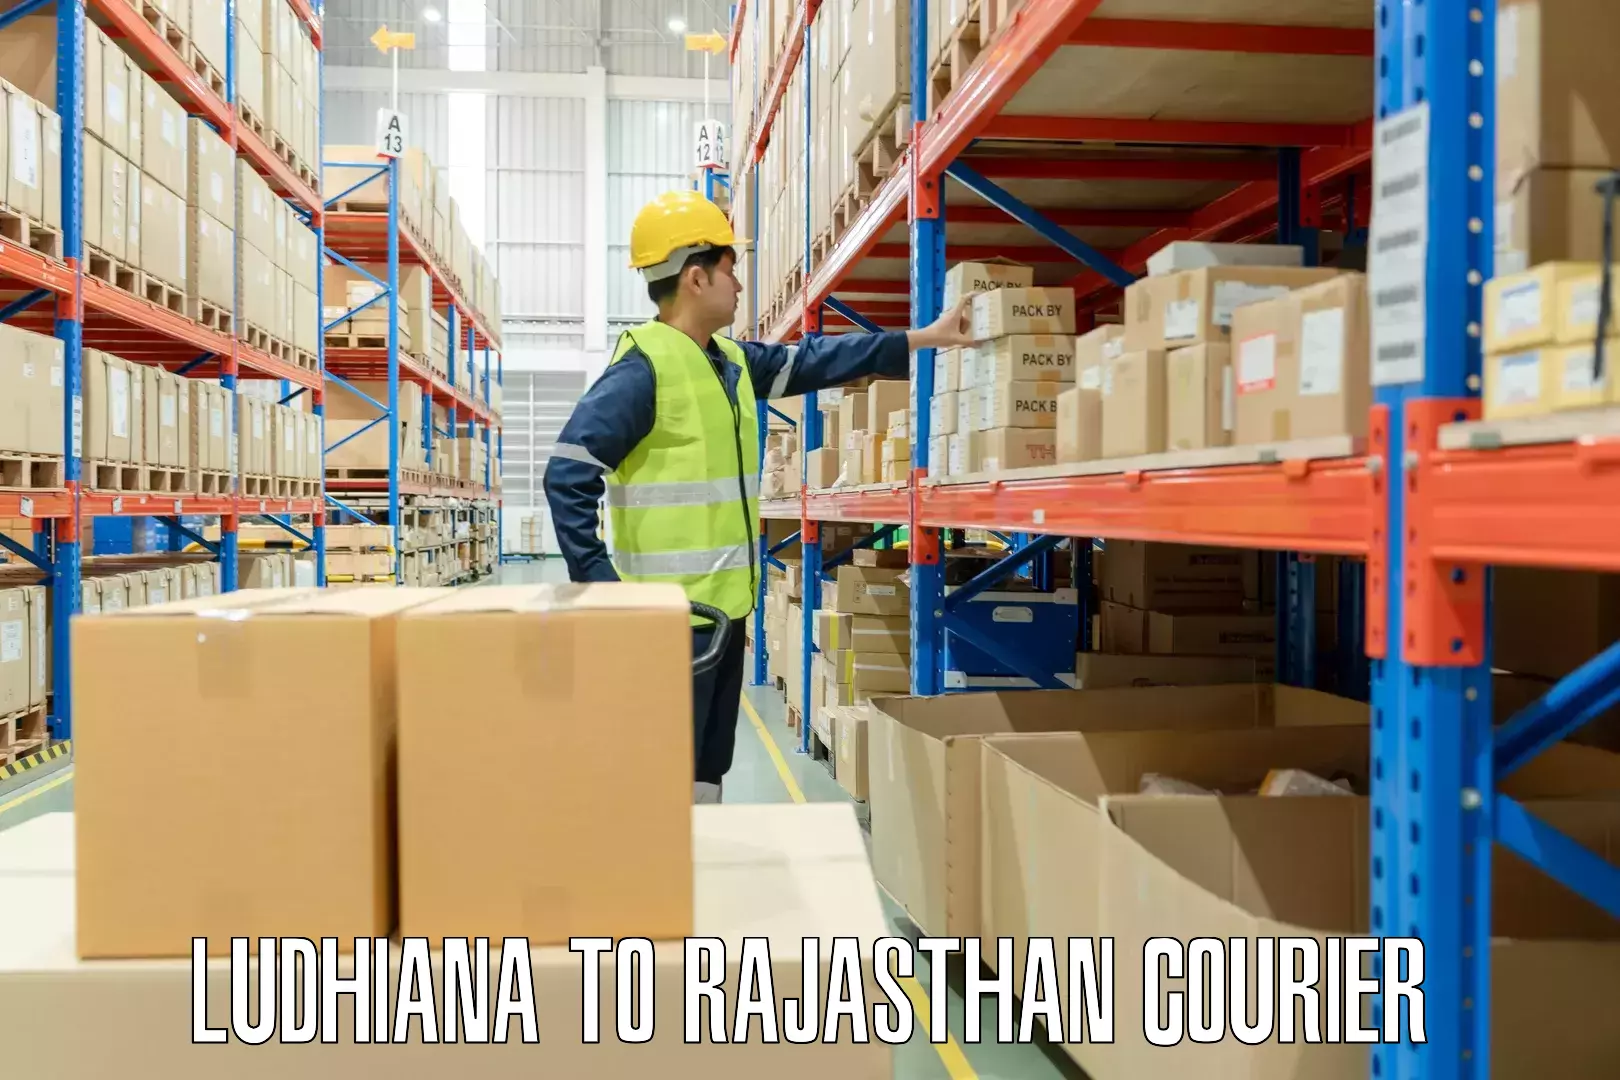 Luggage transport consultancy Ludhiana to Rajasthan